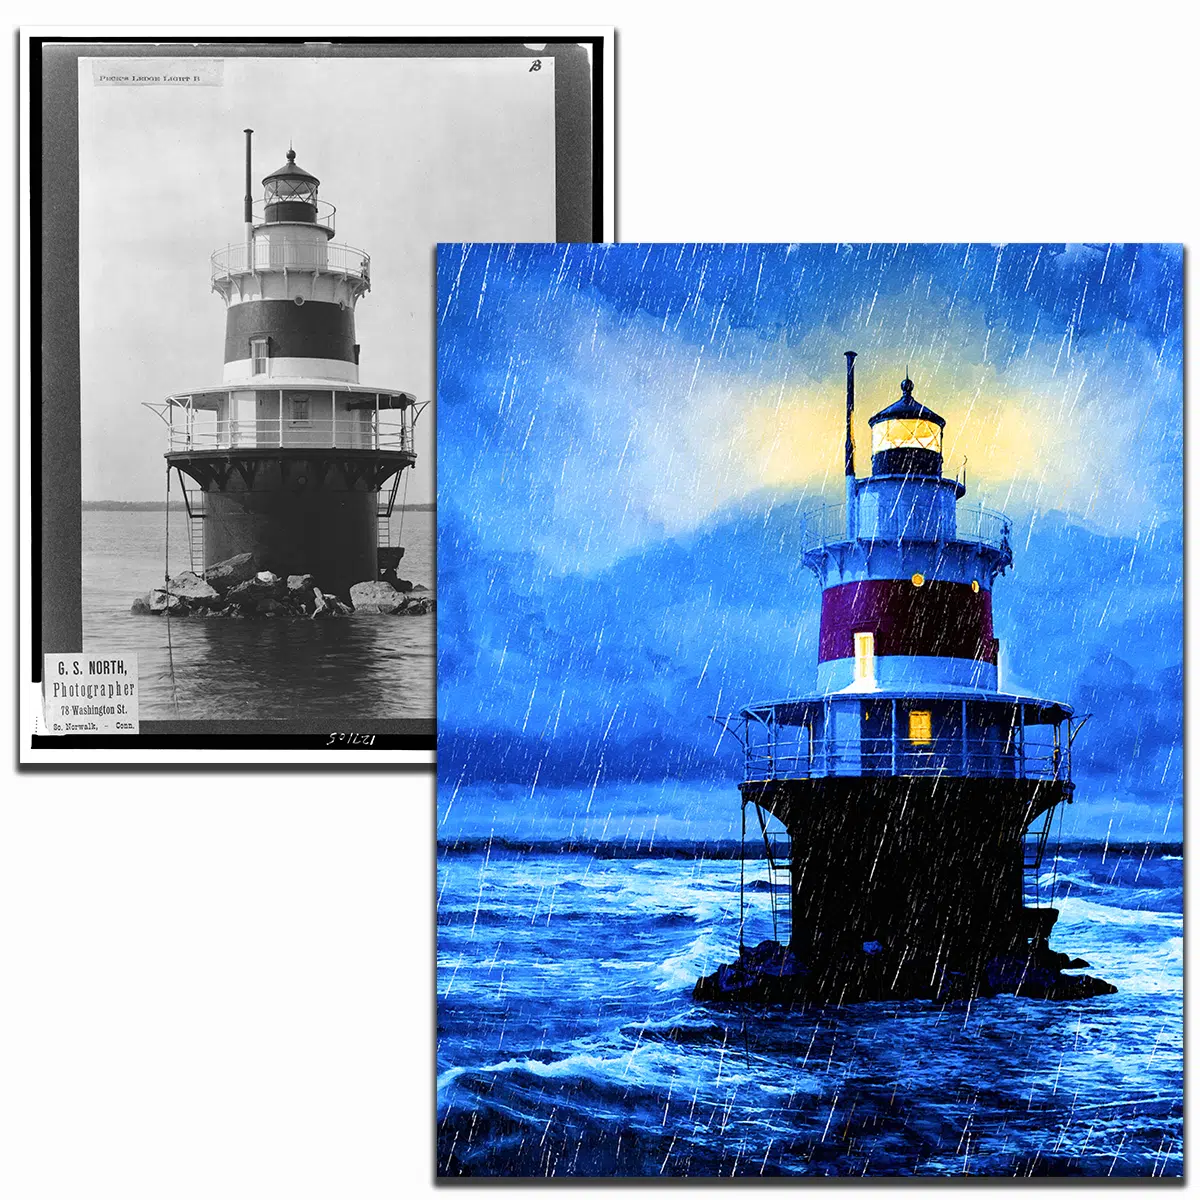 Pecks Ledge Light - Before And After